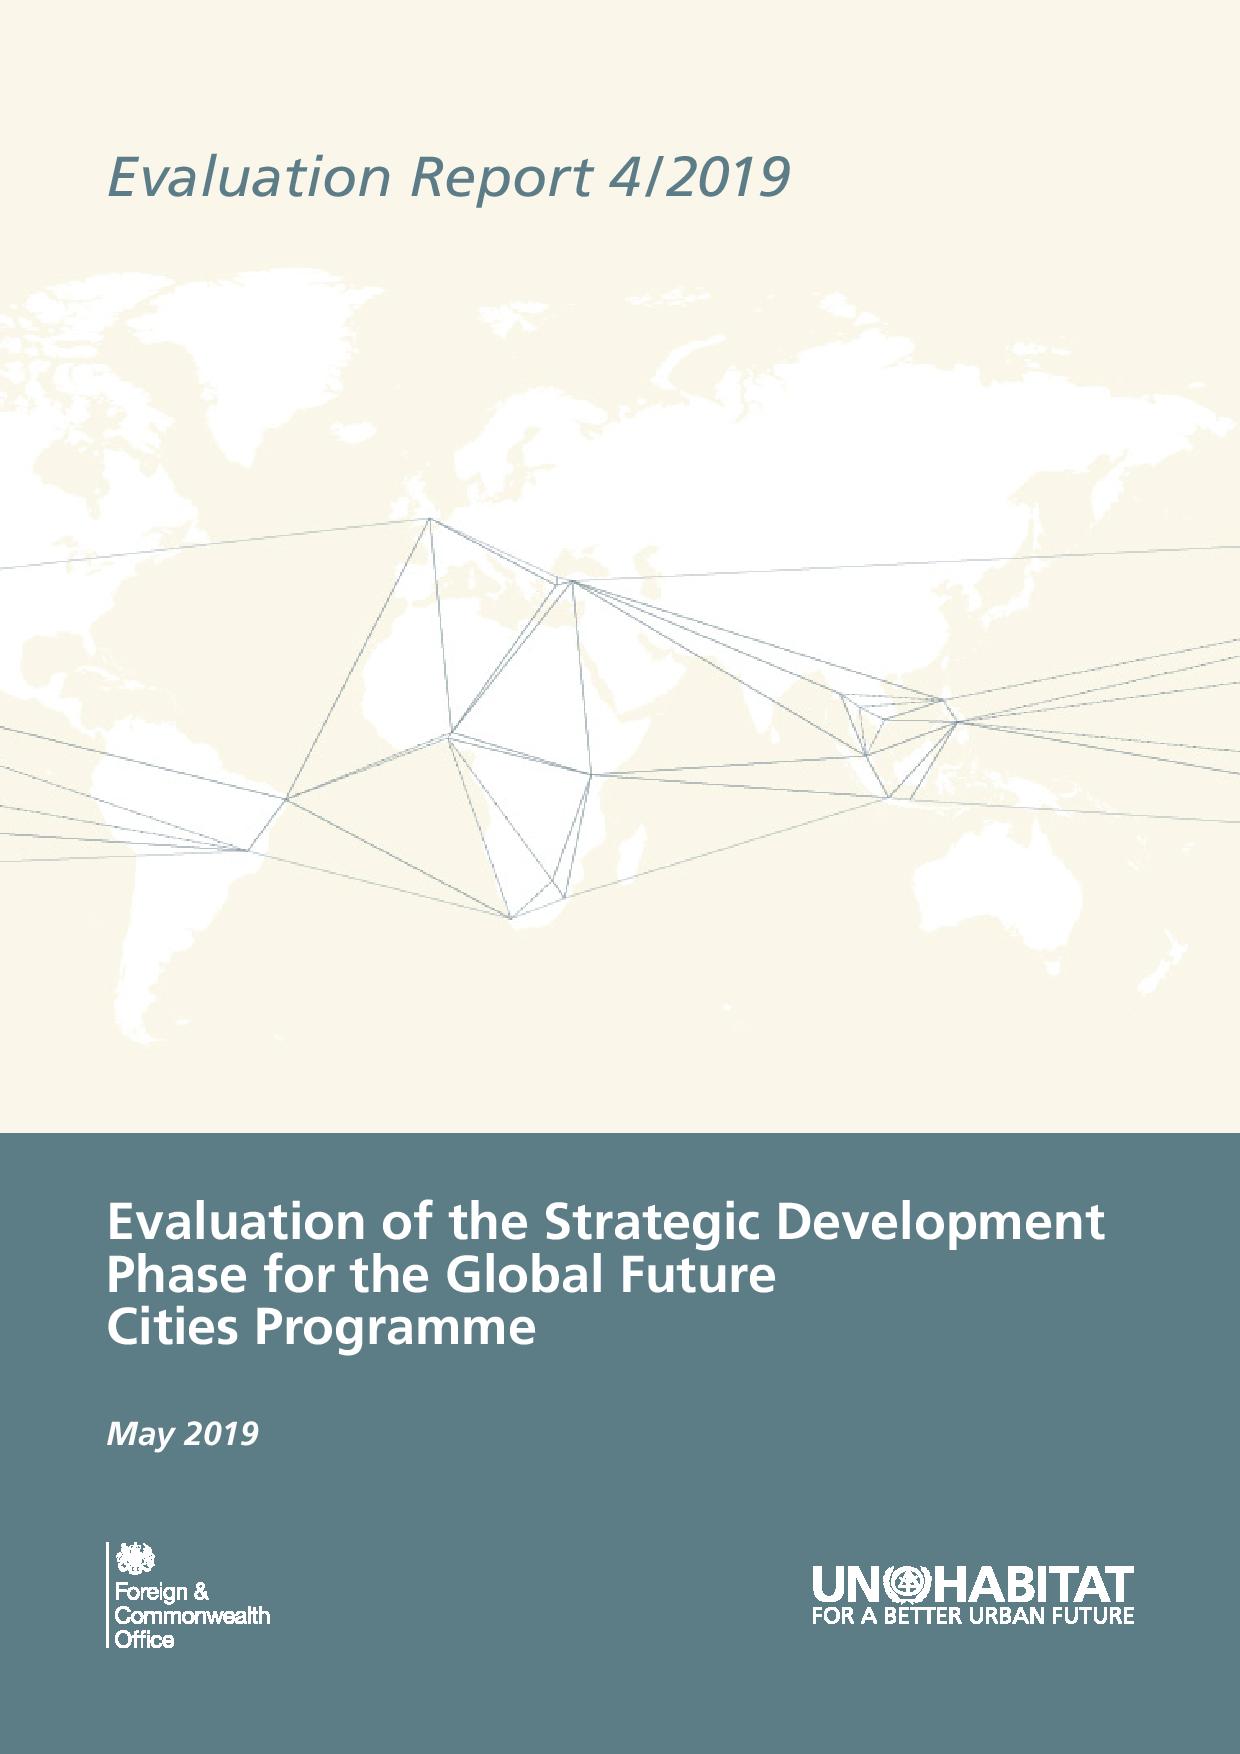 Evaluation of the Strategic Development Phase for the Global Future Cities Programme (2019)